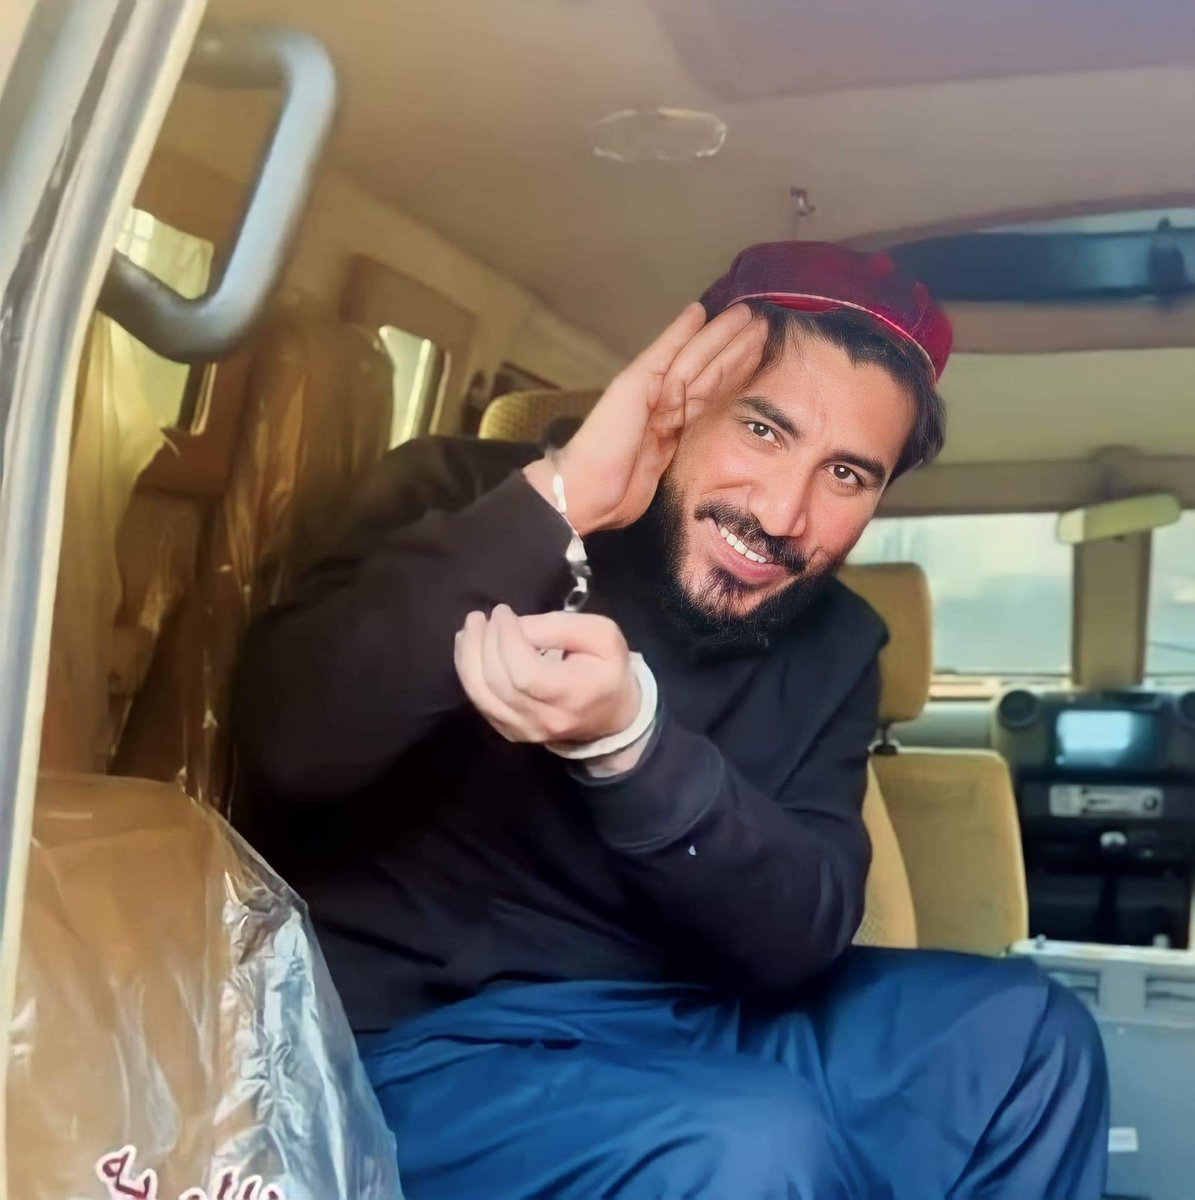 Manzoor Pashteen has been kept in jail by the state agencies of Pakistan for 18 days, He is facing a lot of pain, Whatever the state does, we will not back down our Stand. #ReleaseManzoorPashteen